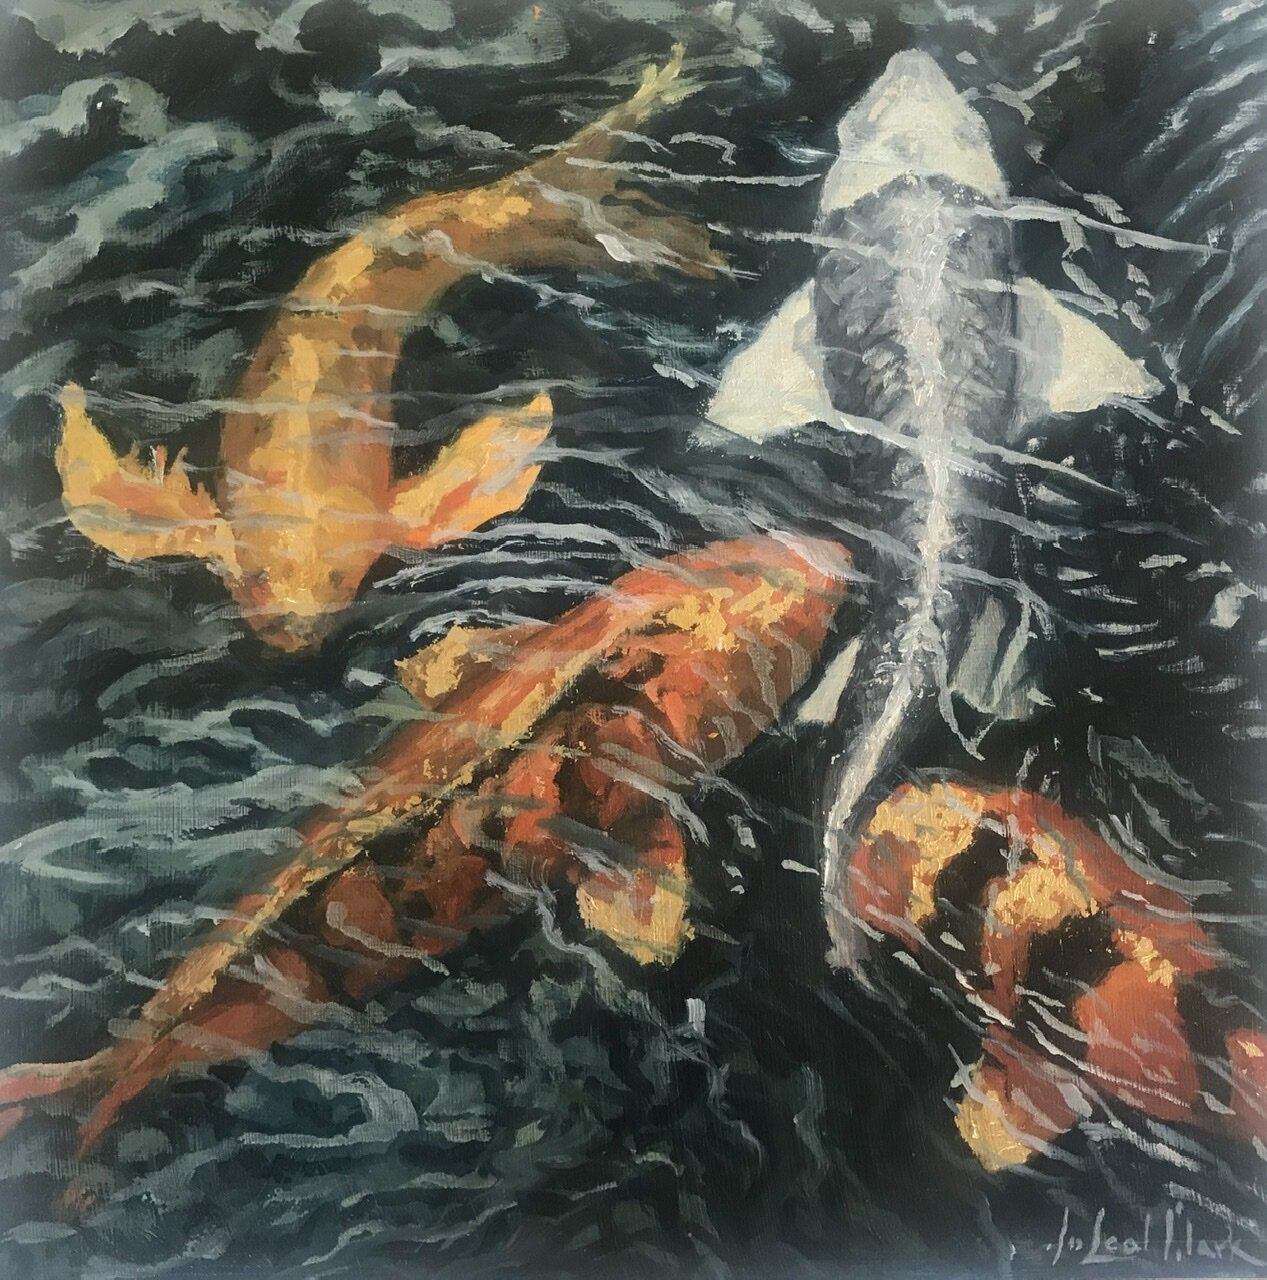 Jo Leal Clark "Koi" Oil, gold and silver leaf on panel $470